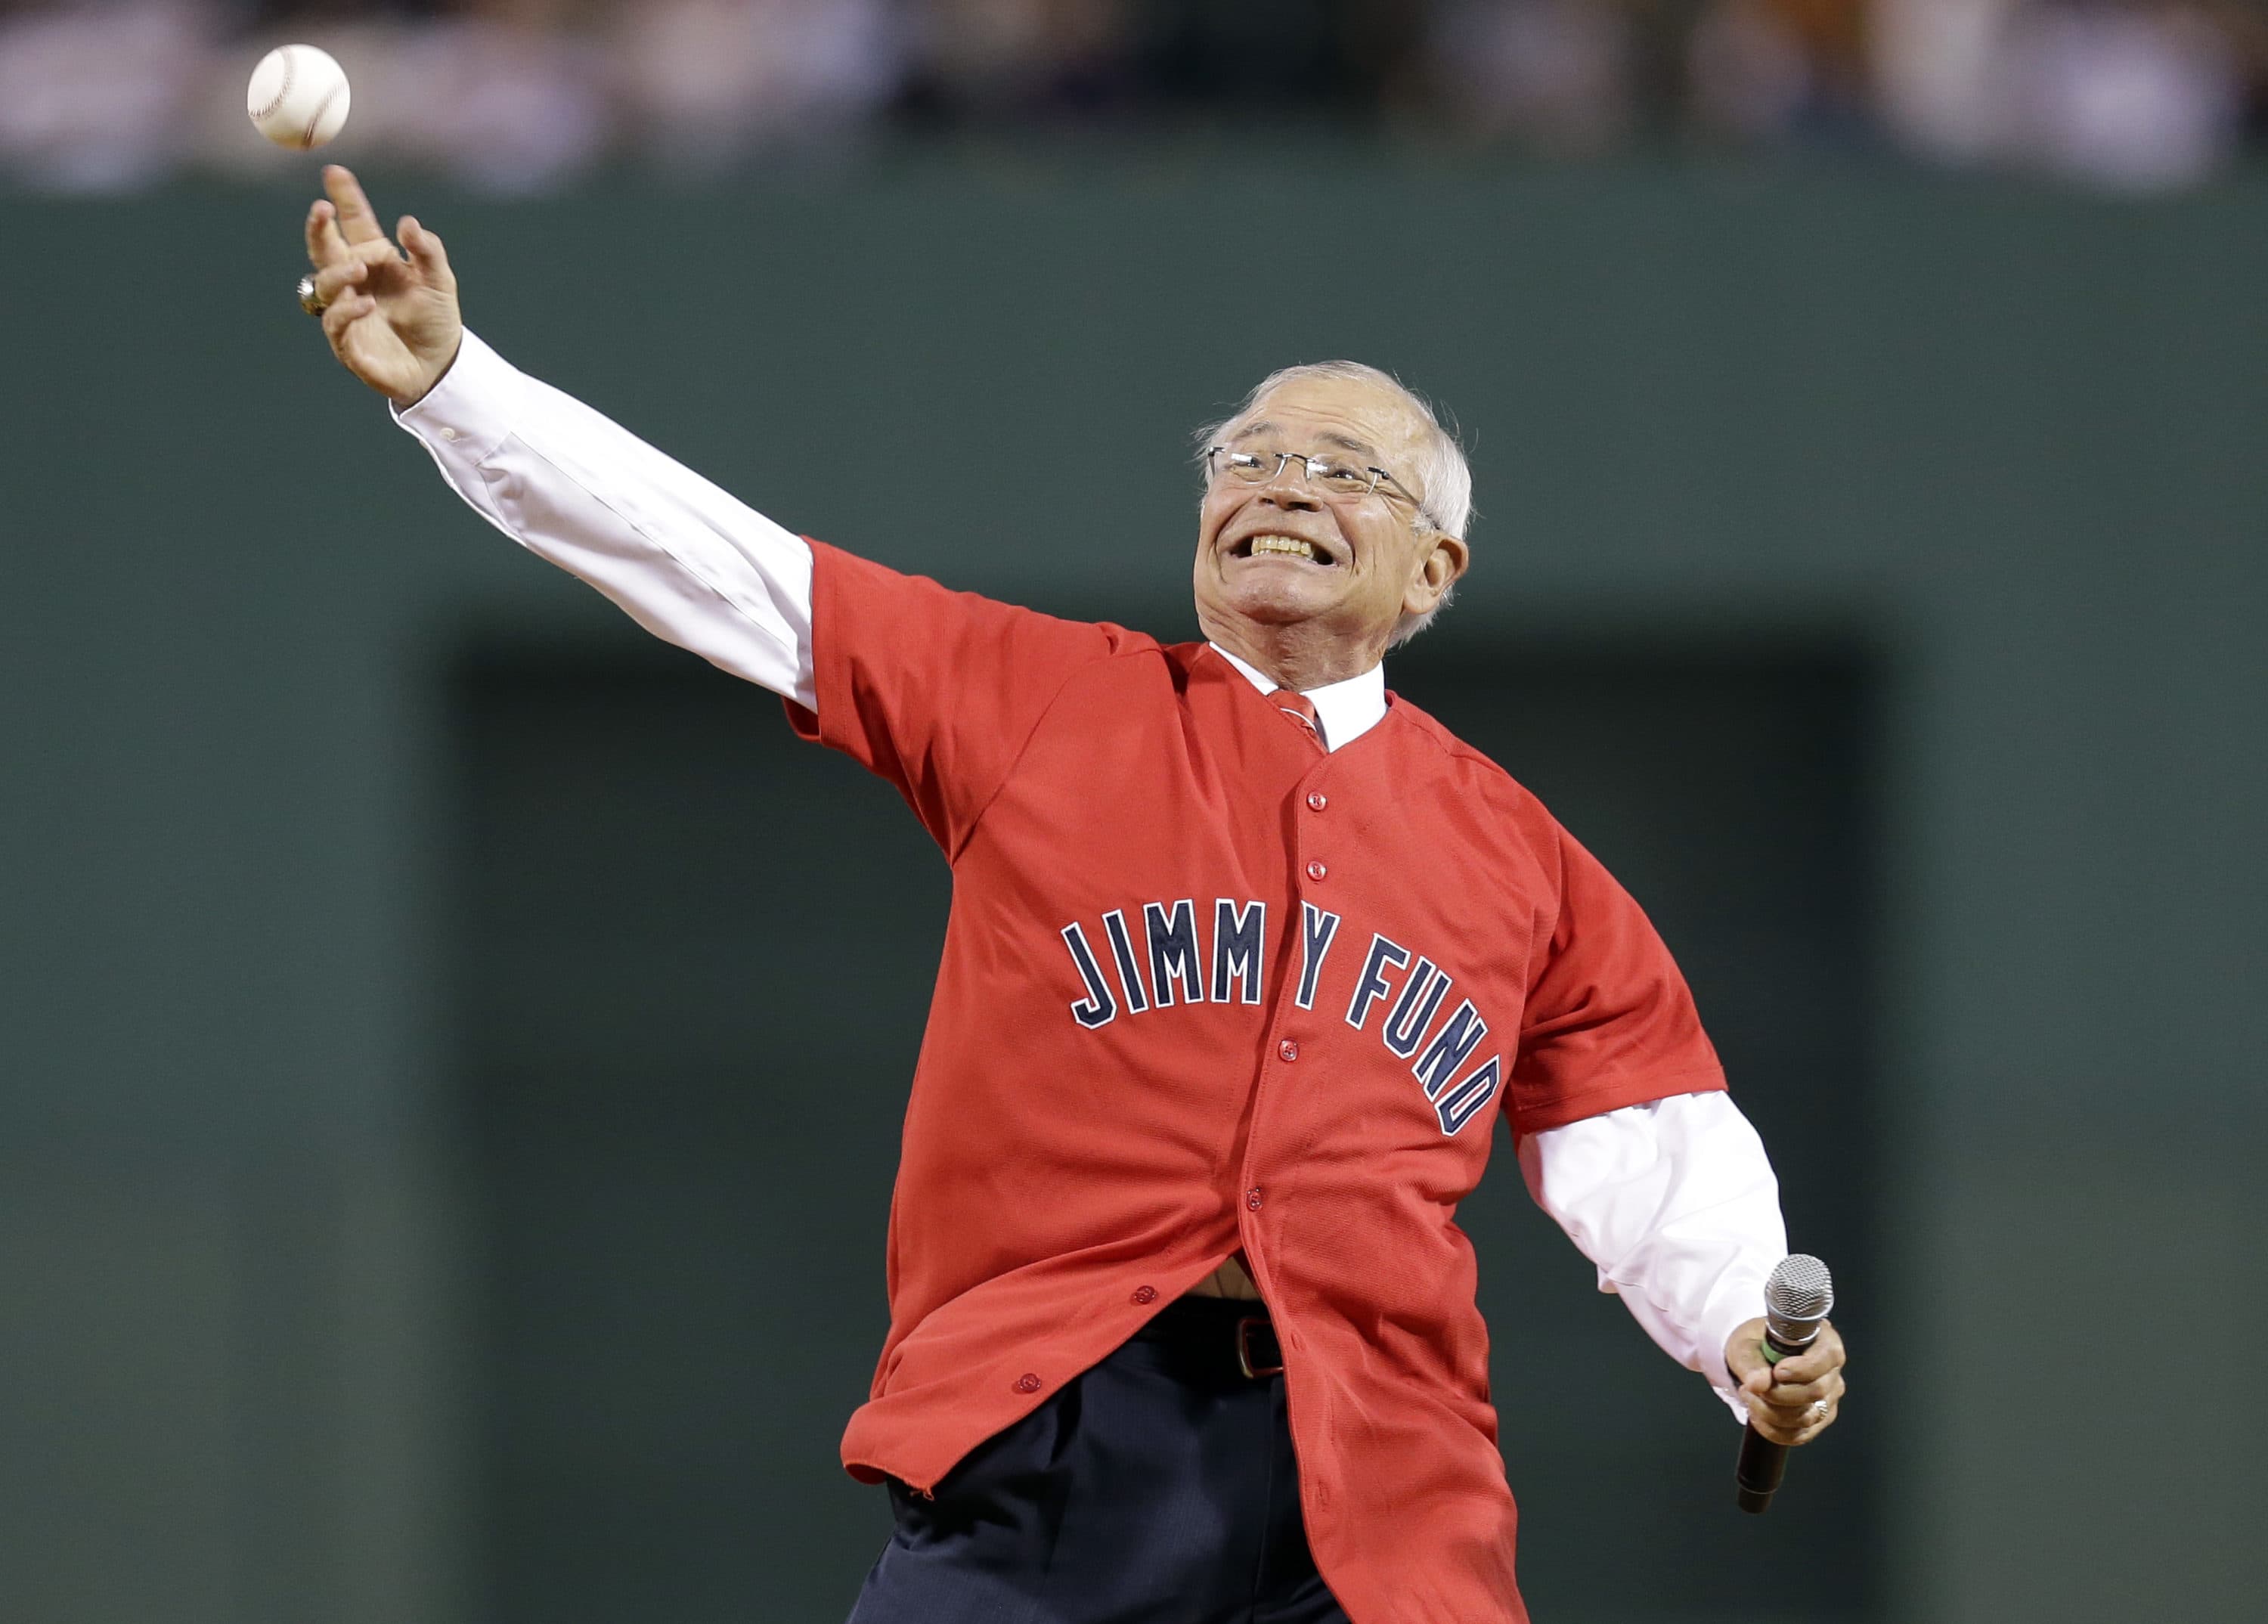 Veteran Boston Red Sox radio broadcaster Joe Castiglione throws a ceremonial first pitch prior to a baseball game against the New York Yankees at Fenway Park in Boston on Sept. 12, 2012. (Elise Amendola/AP)